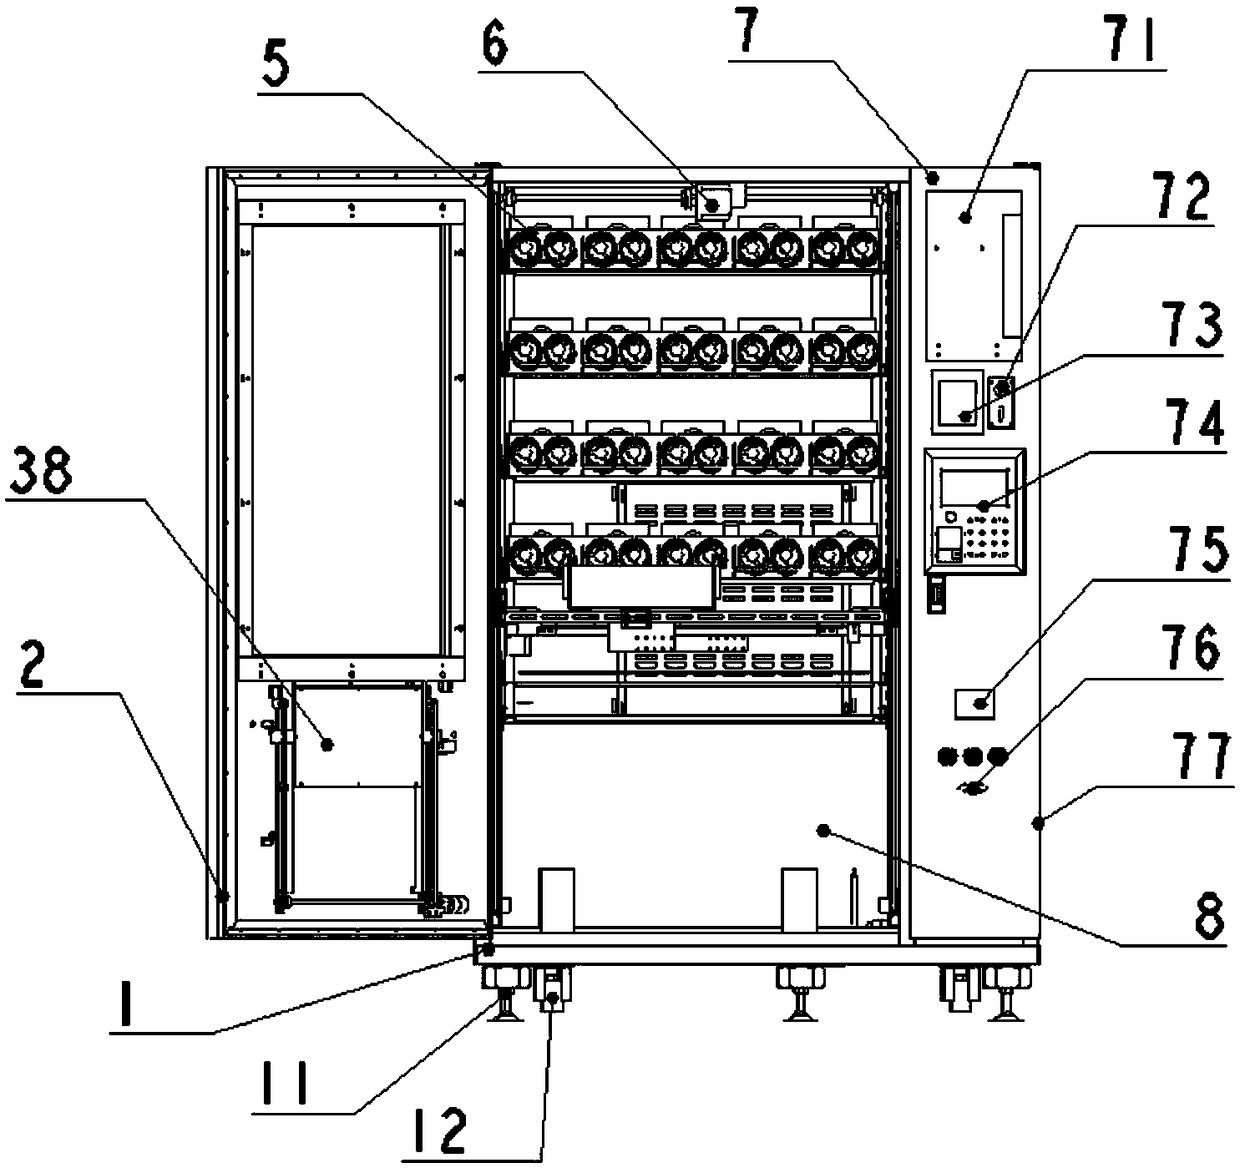 Ascending and descending conveying type automatic vending machine